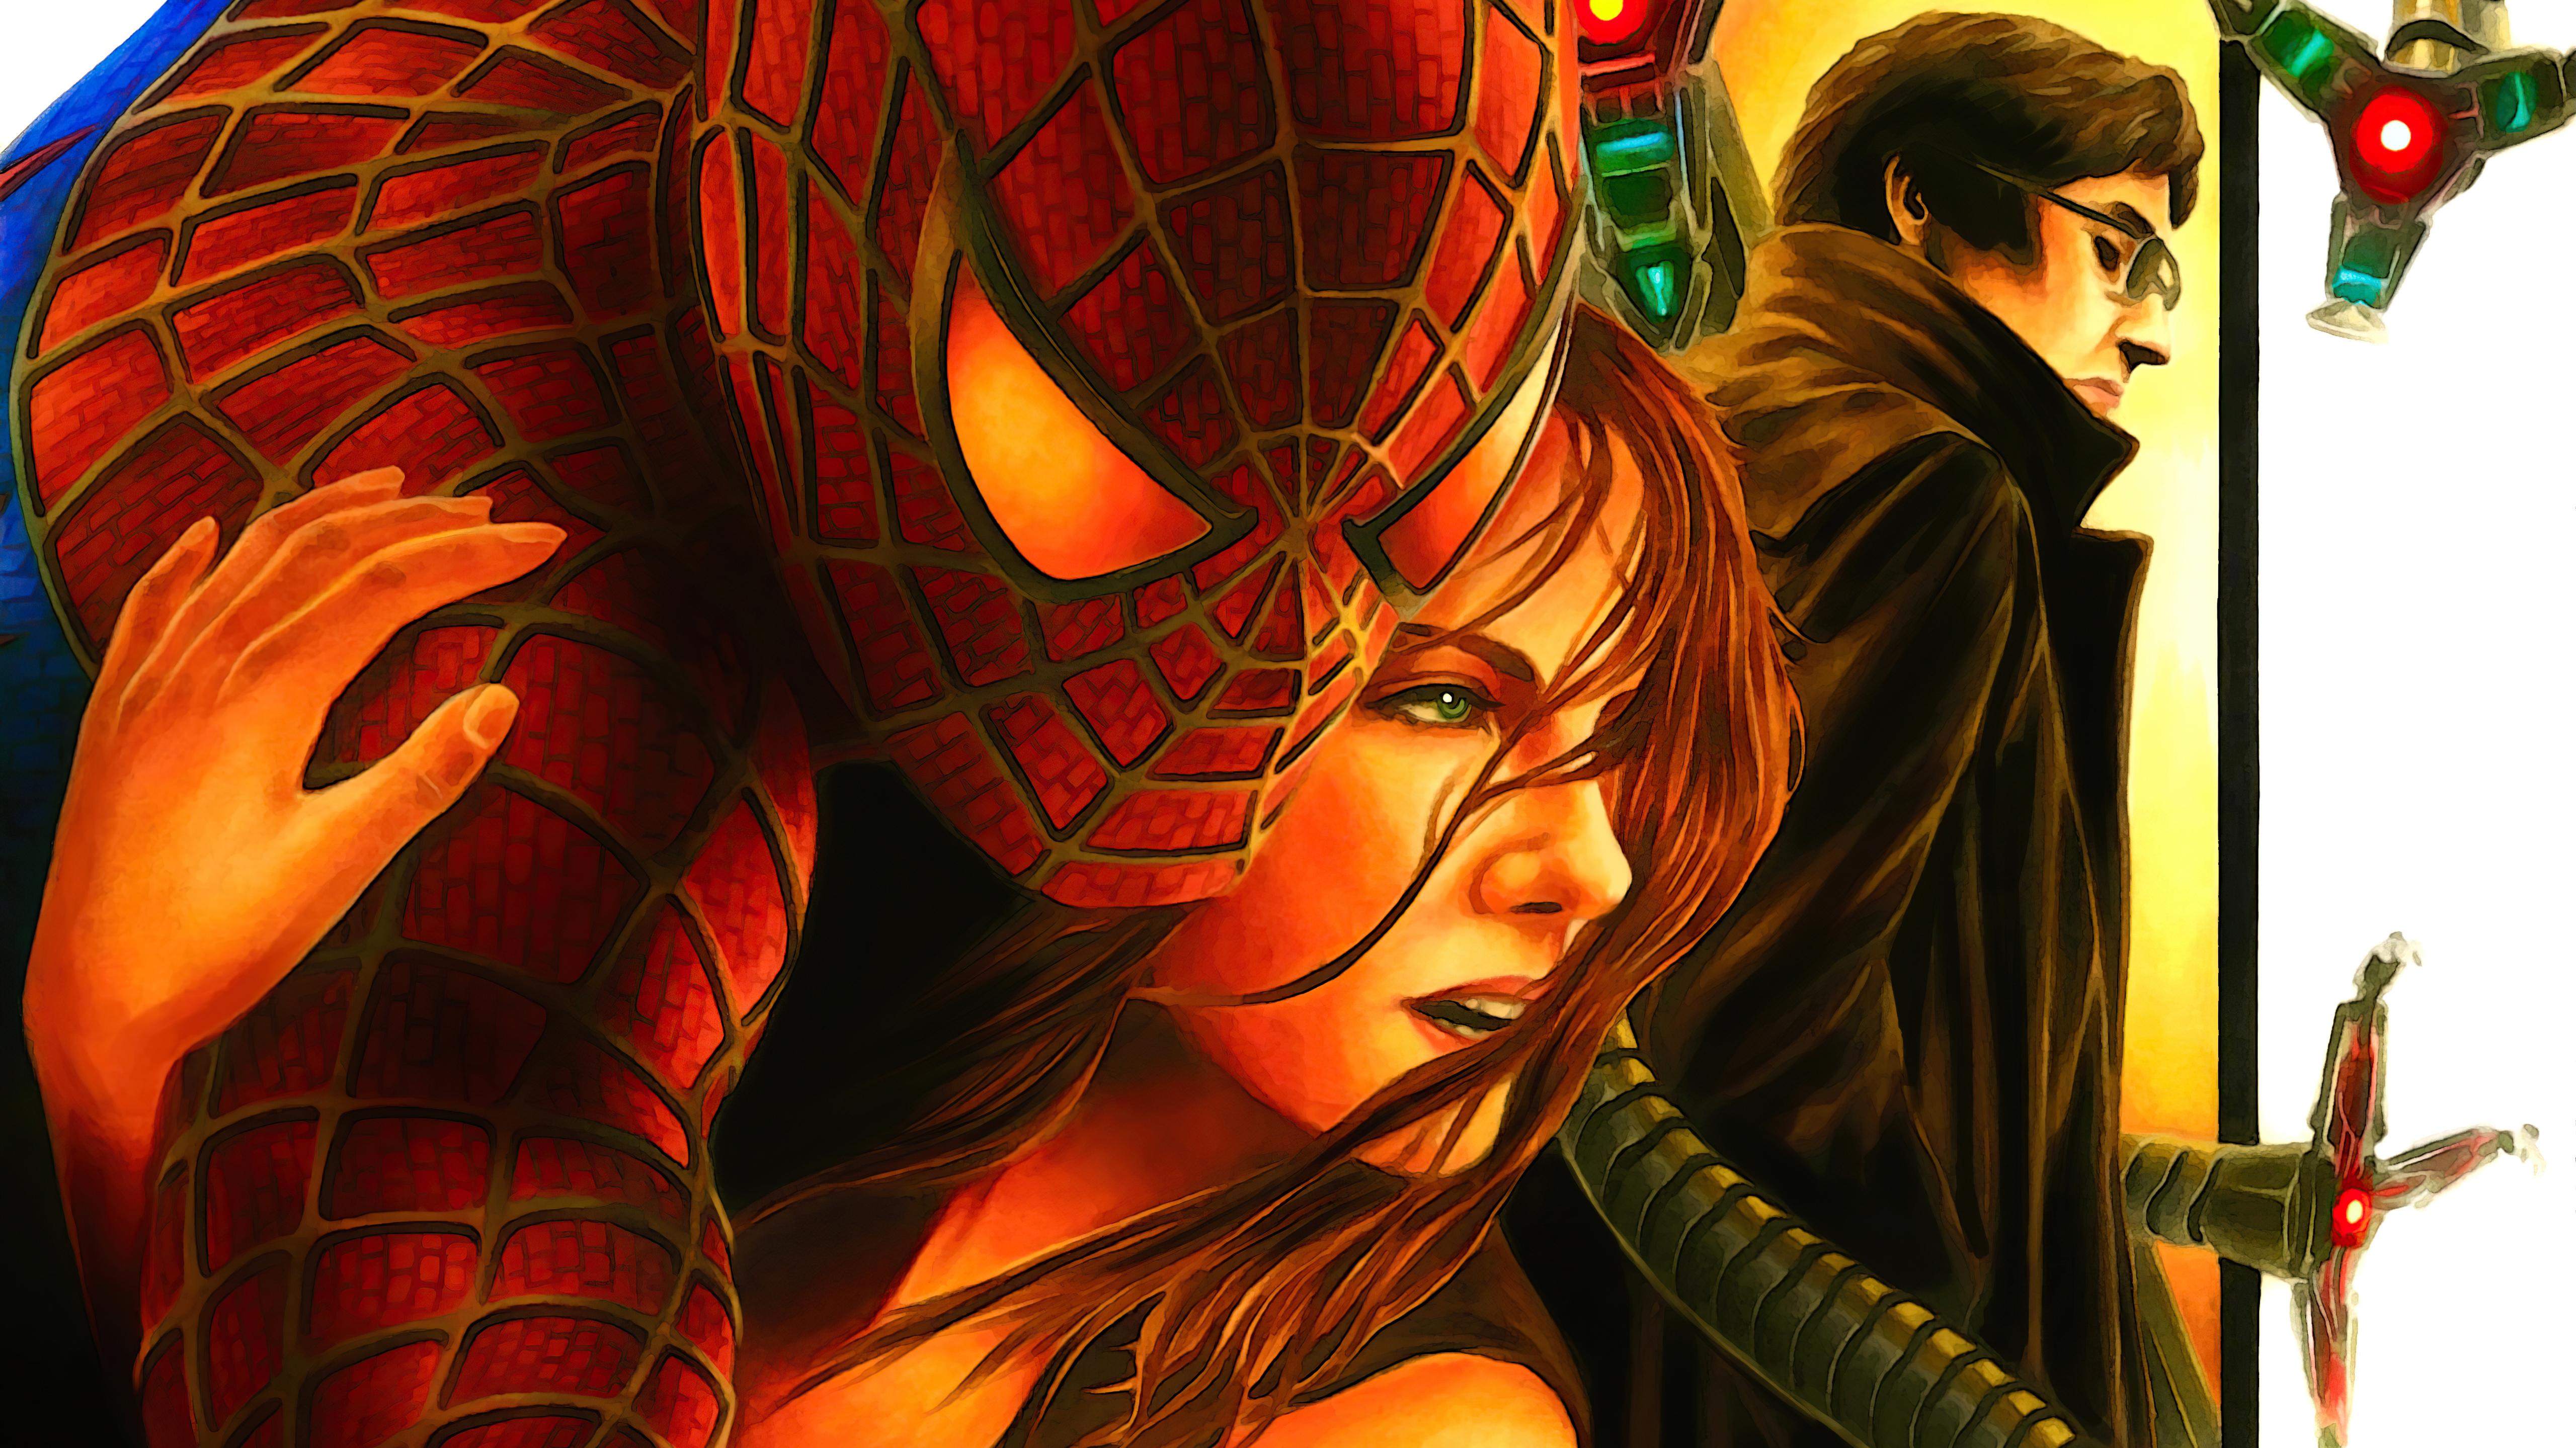 Spiderman And Mary Jane Poster Wallpaper HD Superheroes